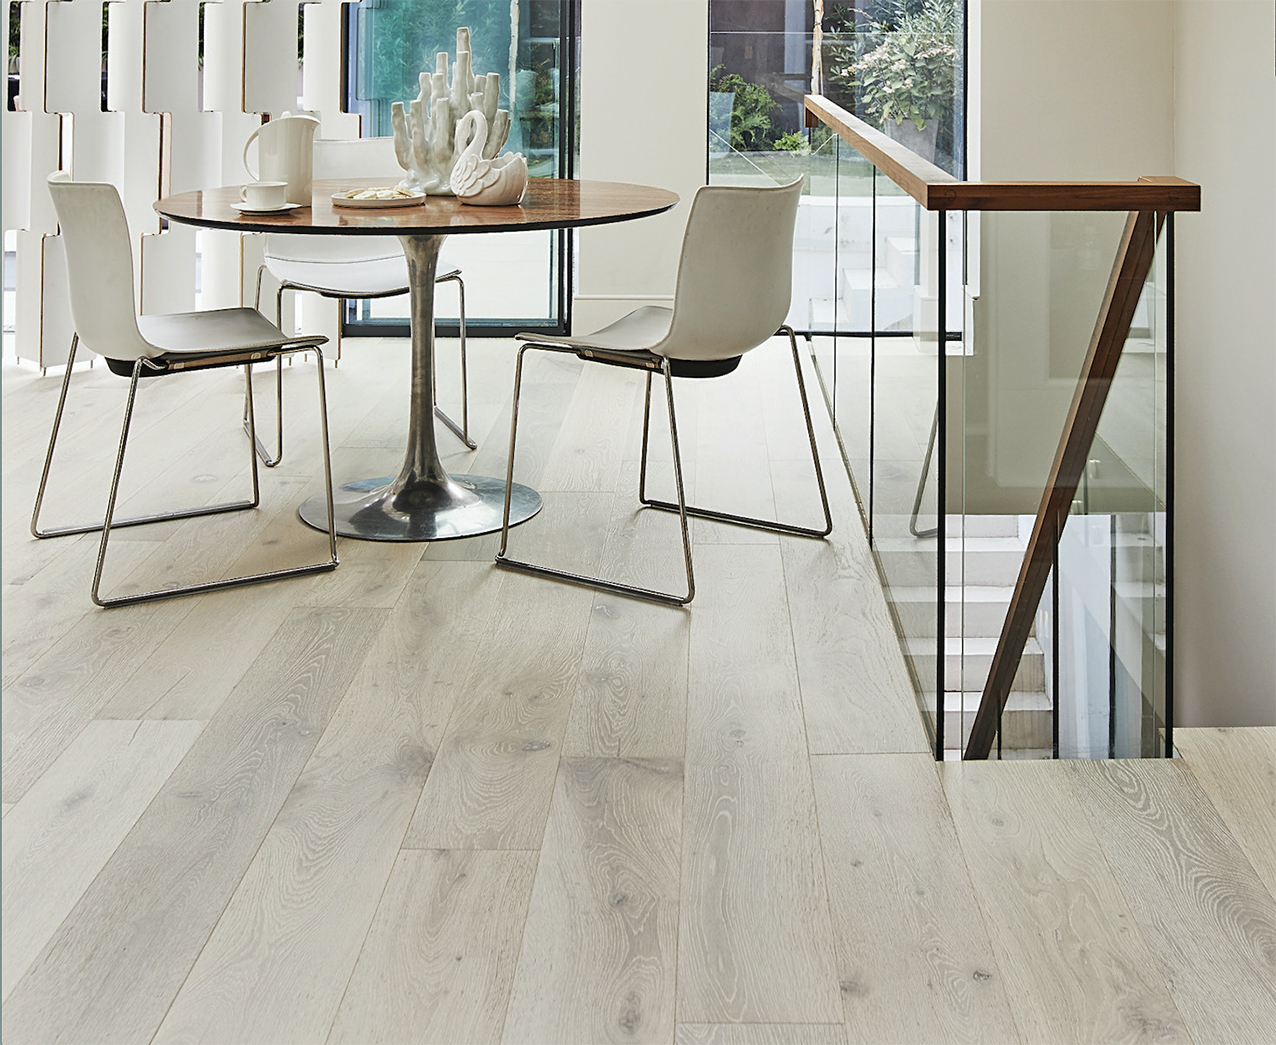 Quick step laminate is a good choice of eco floor